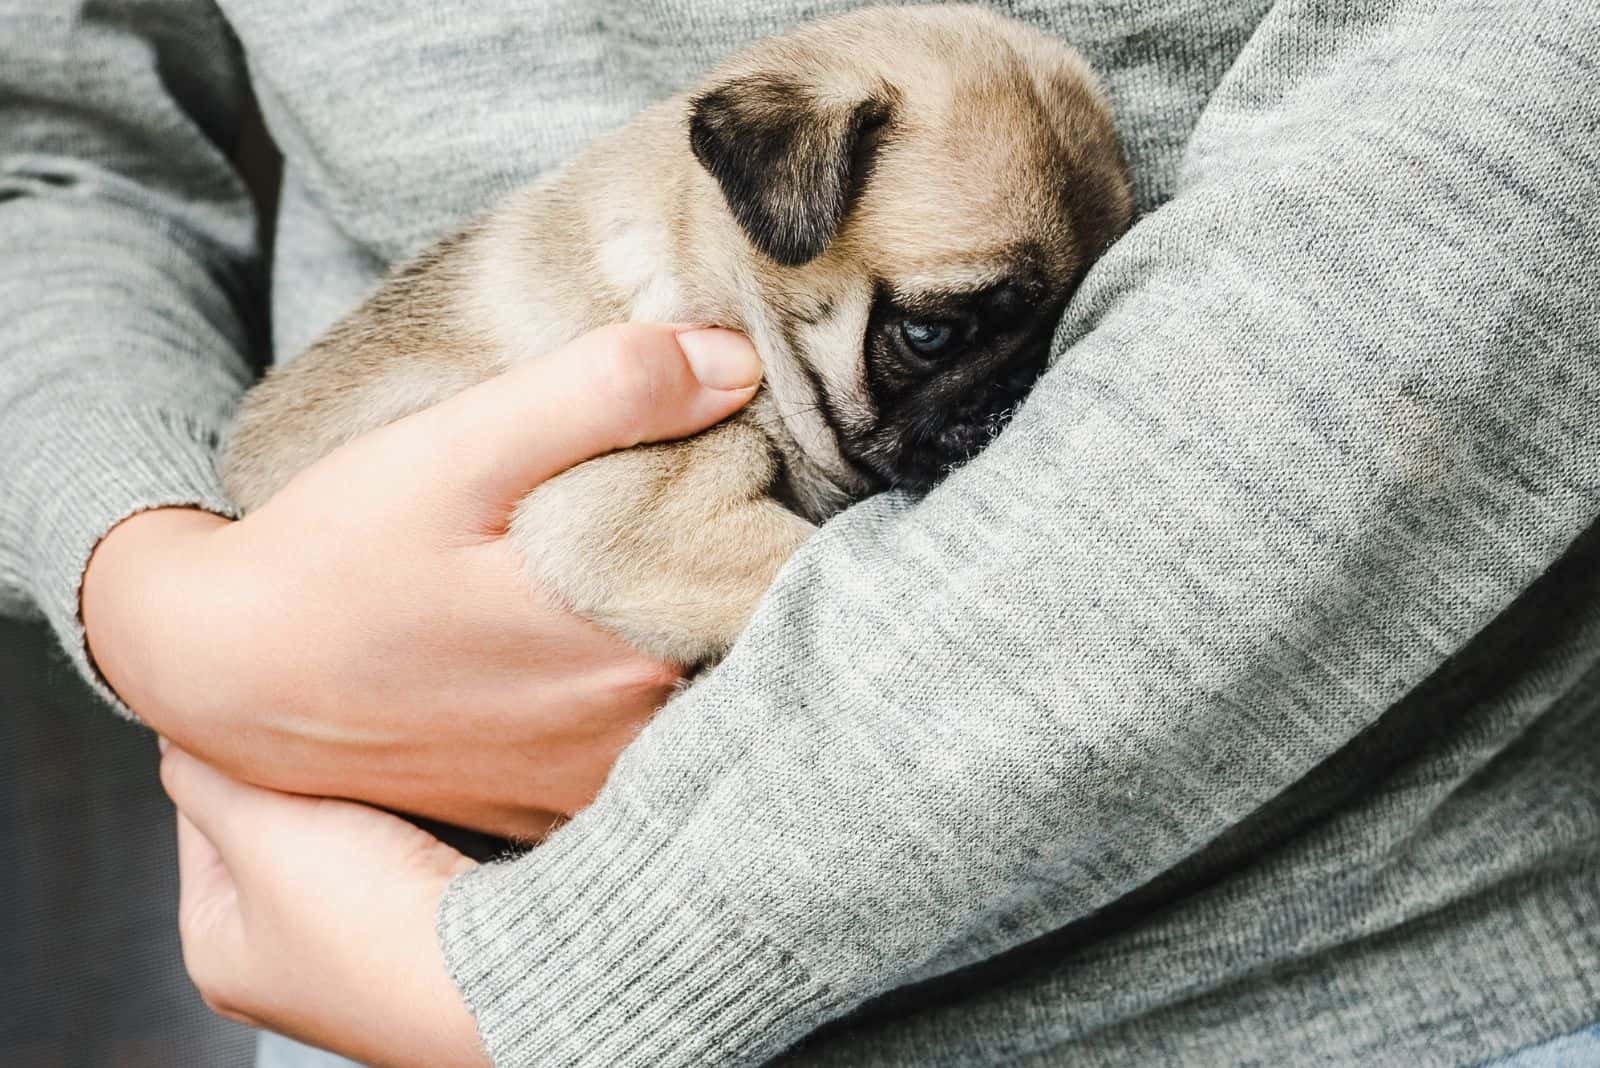 owner hugging puppy sleeping in cropped image